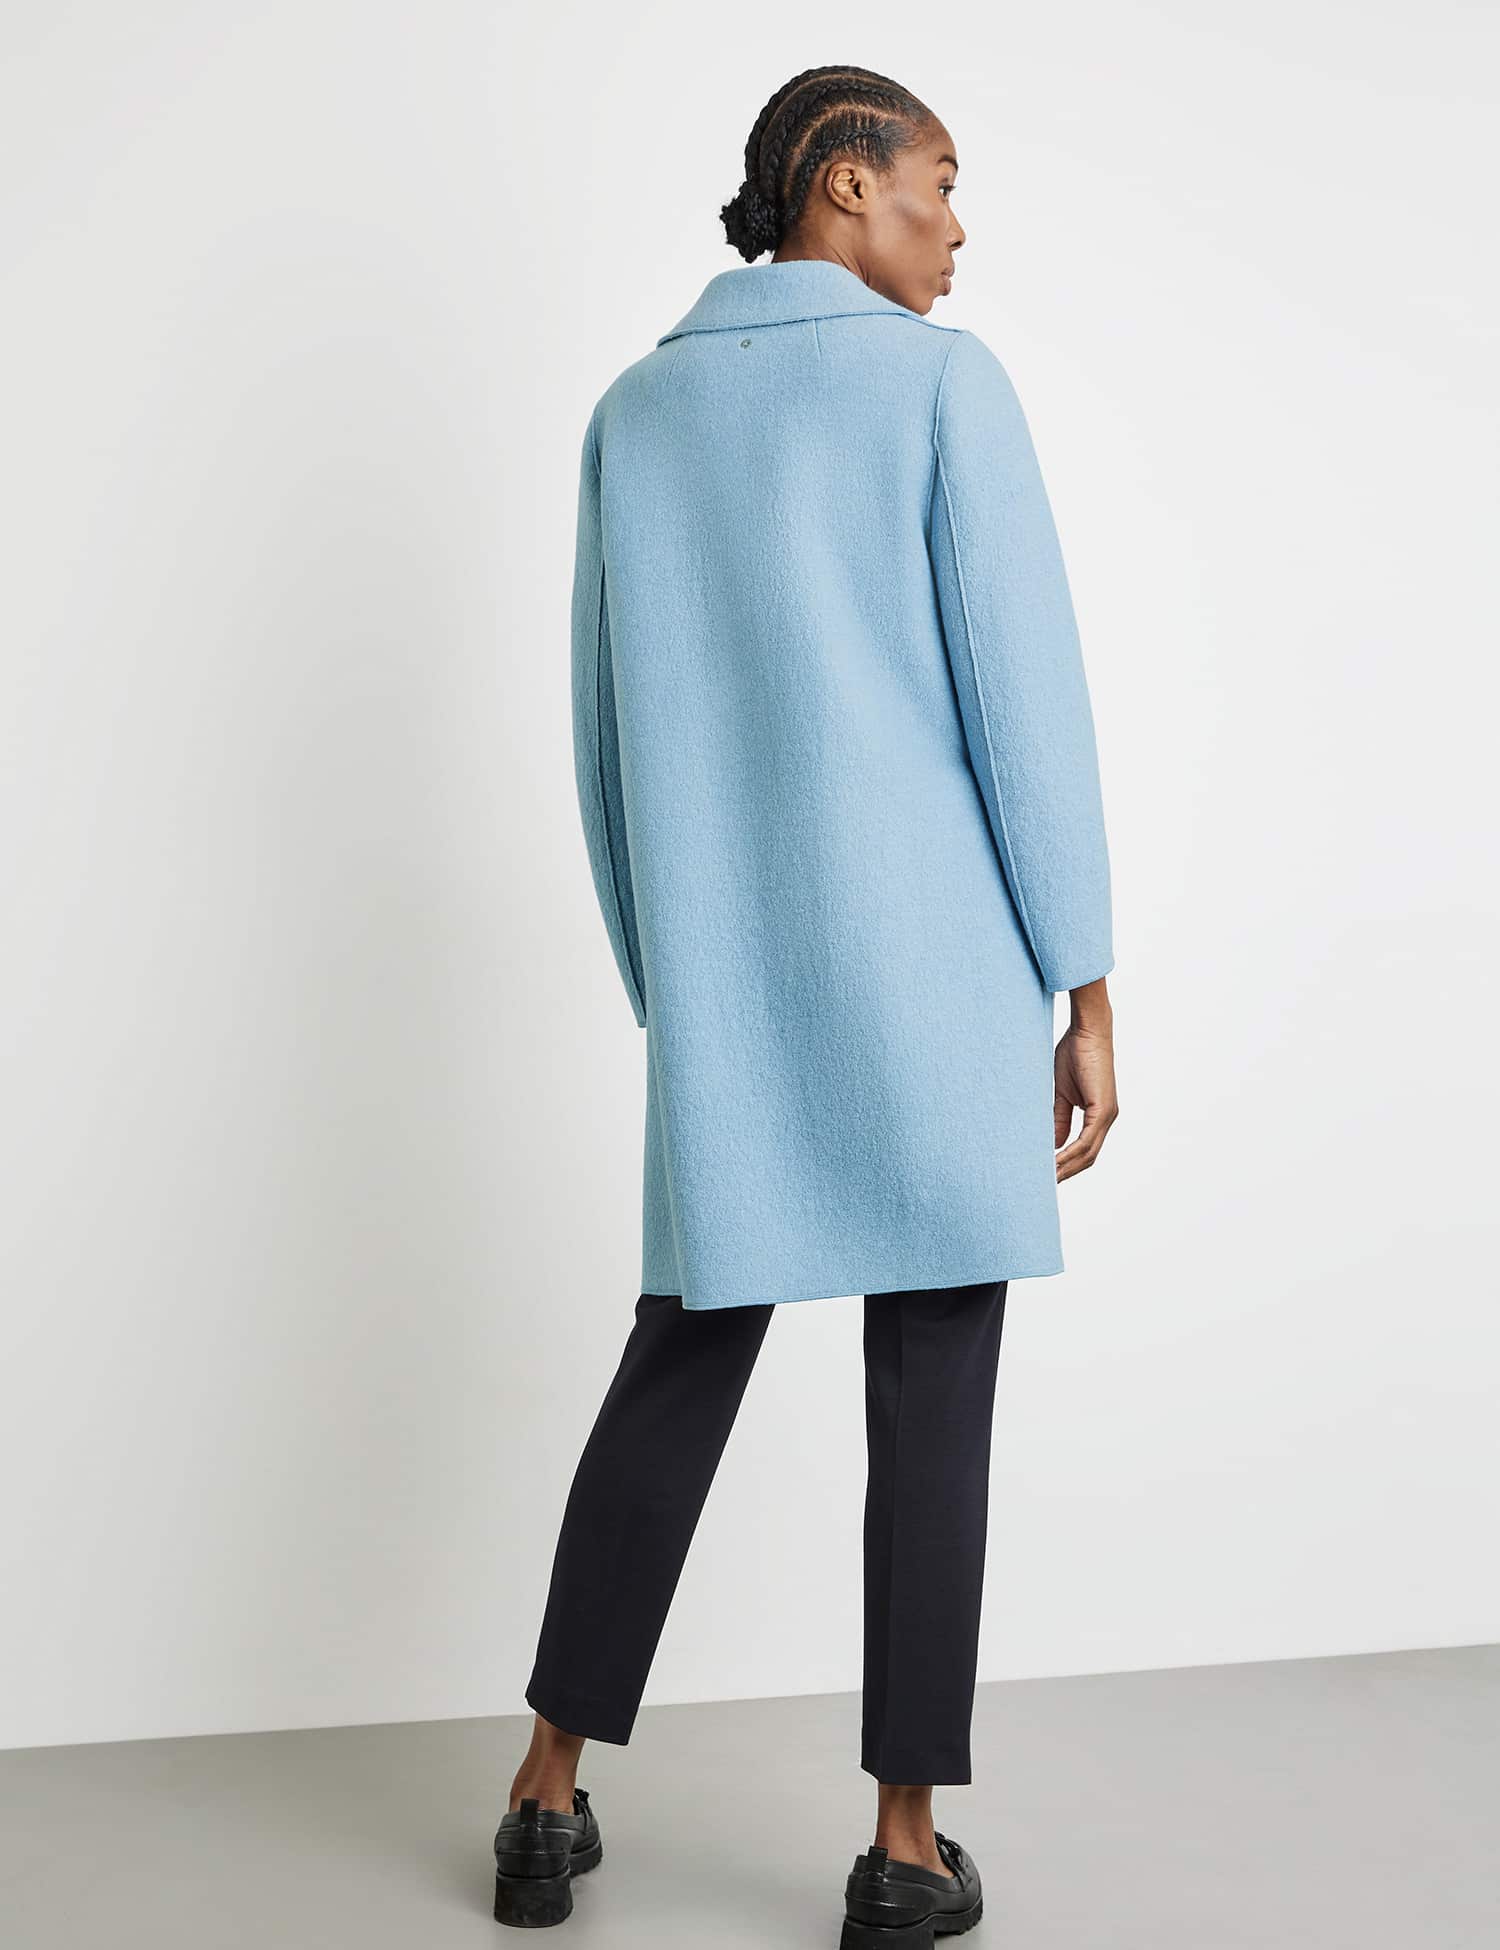 Gerry Weber Coat With Wool And Lapel Collar